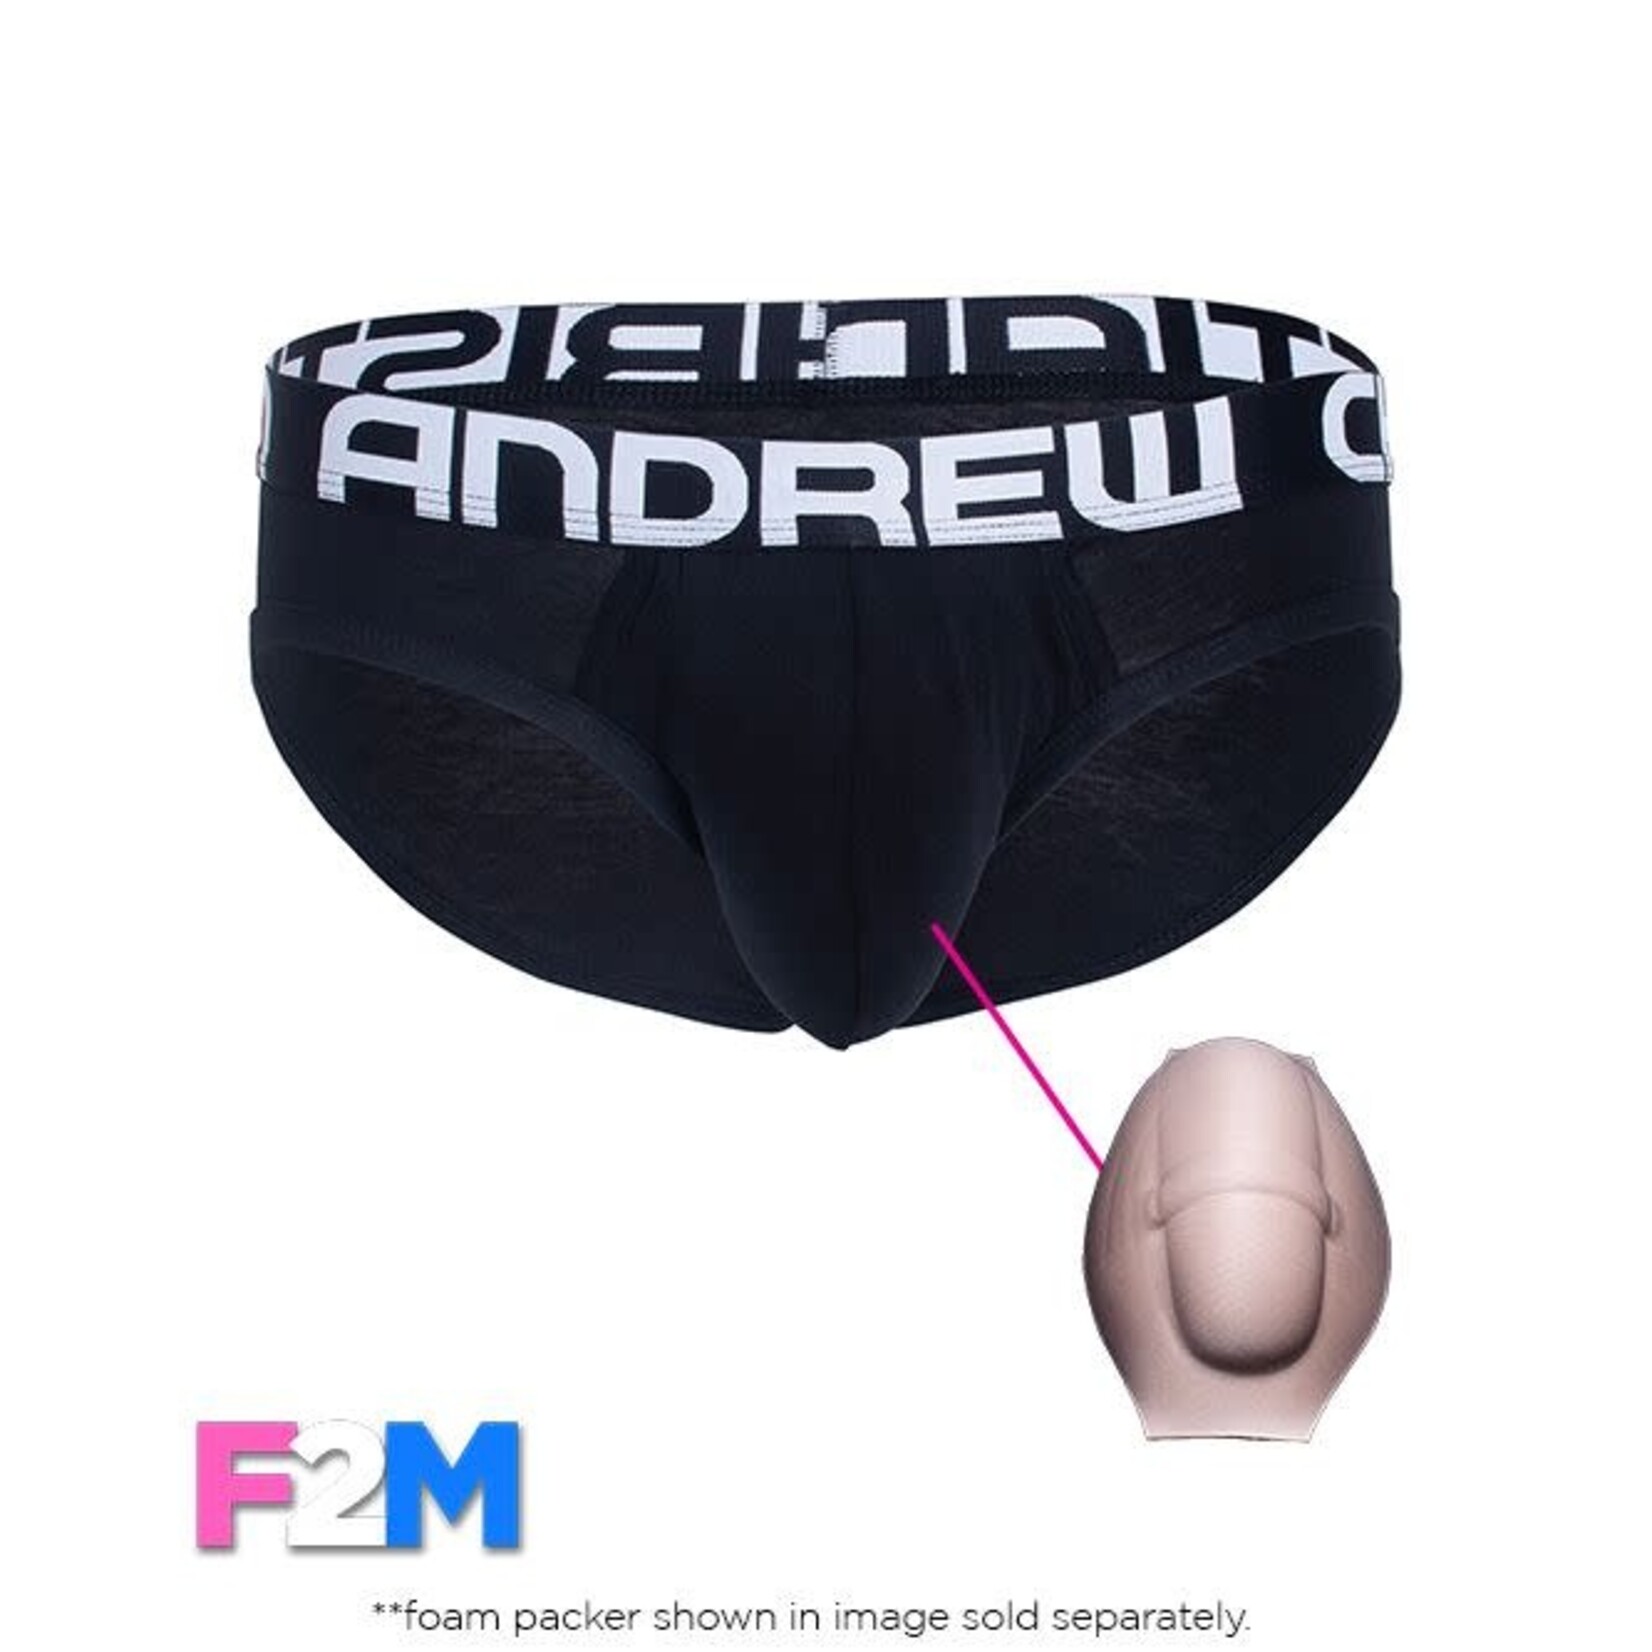 ANDREW CHRISTIAN ANDREW CHRISTIAN - F2M TRANS MASC BRIEF SMALL